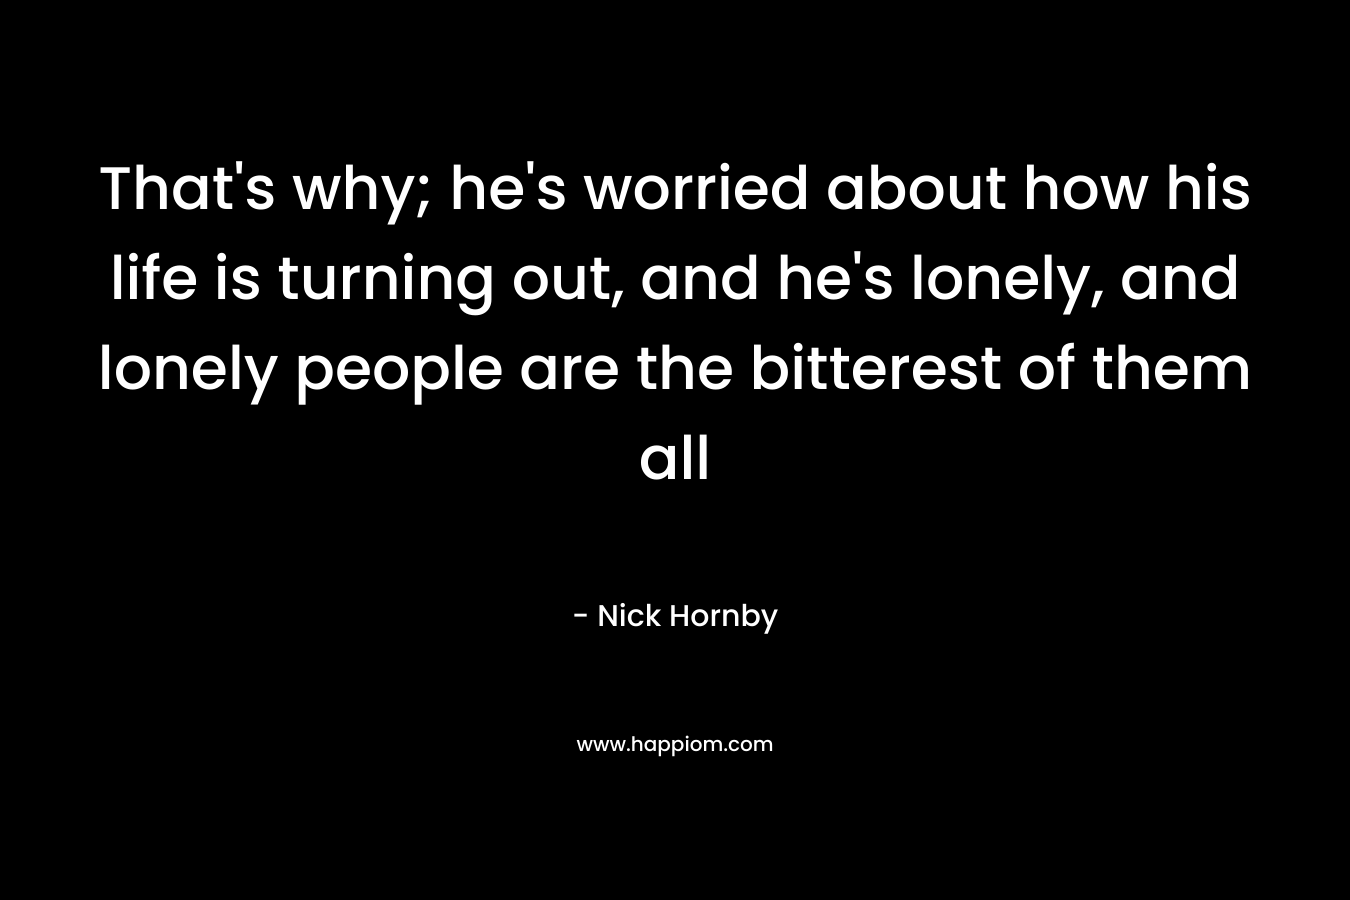 That's why; he's worried about how his life is turning out, and he's lonely, and lonely people are the bitterest of them all